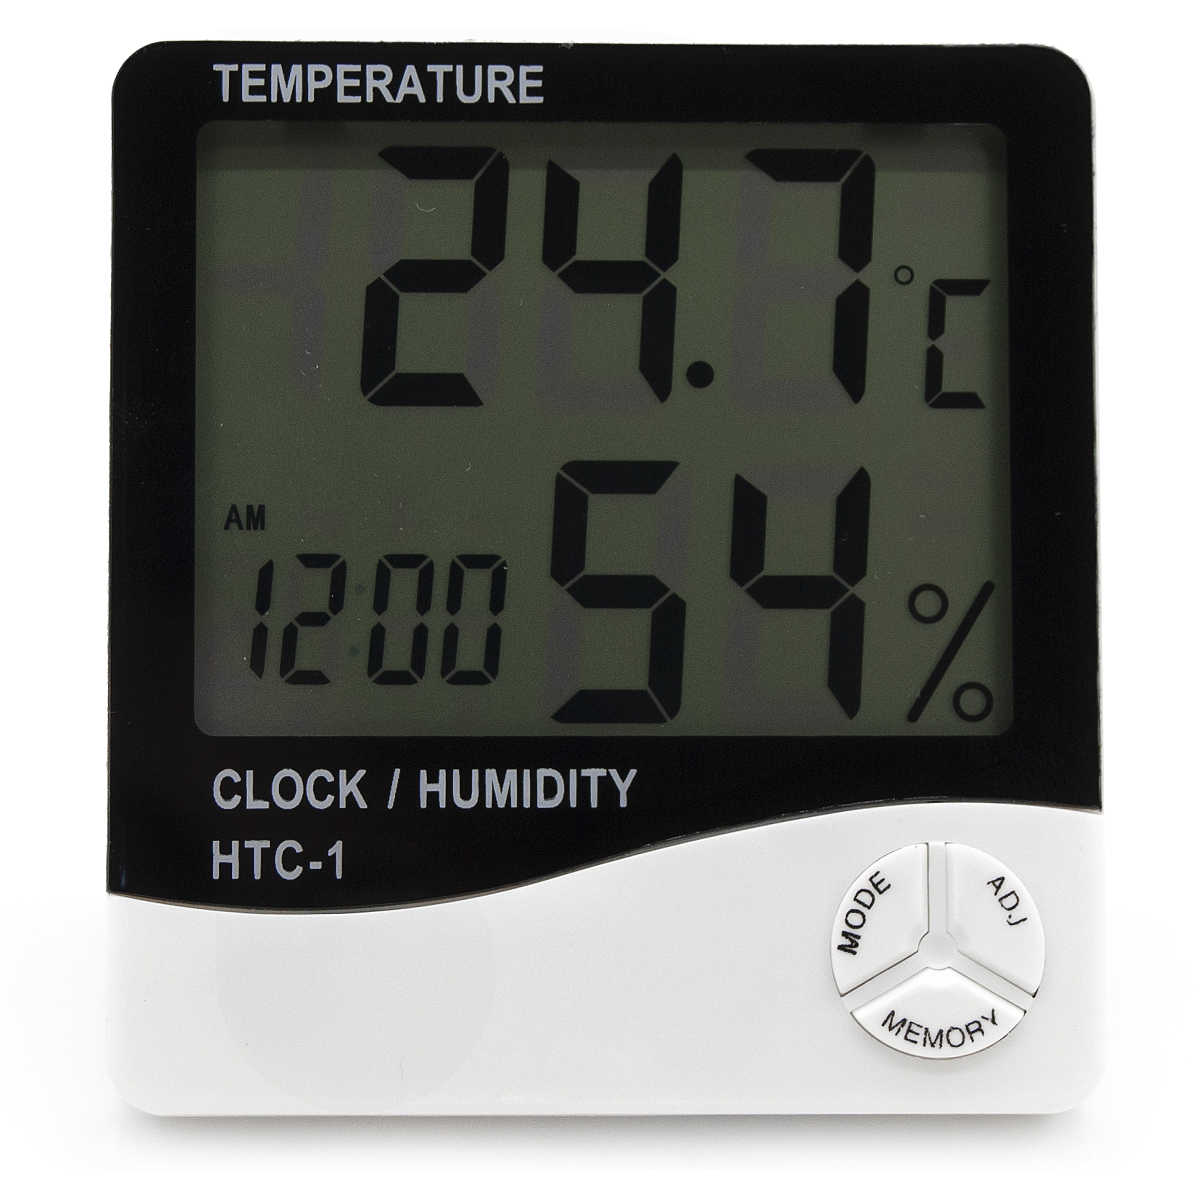 TFA Thermo-Hygrometer Red Hands